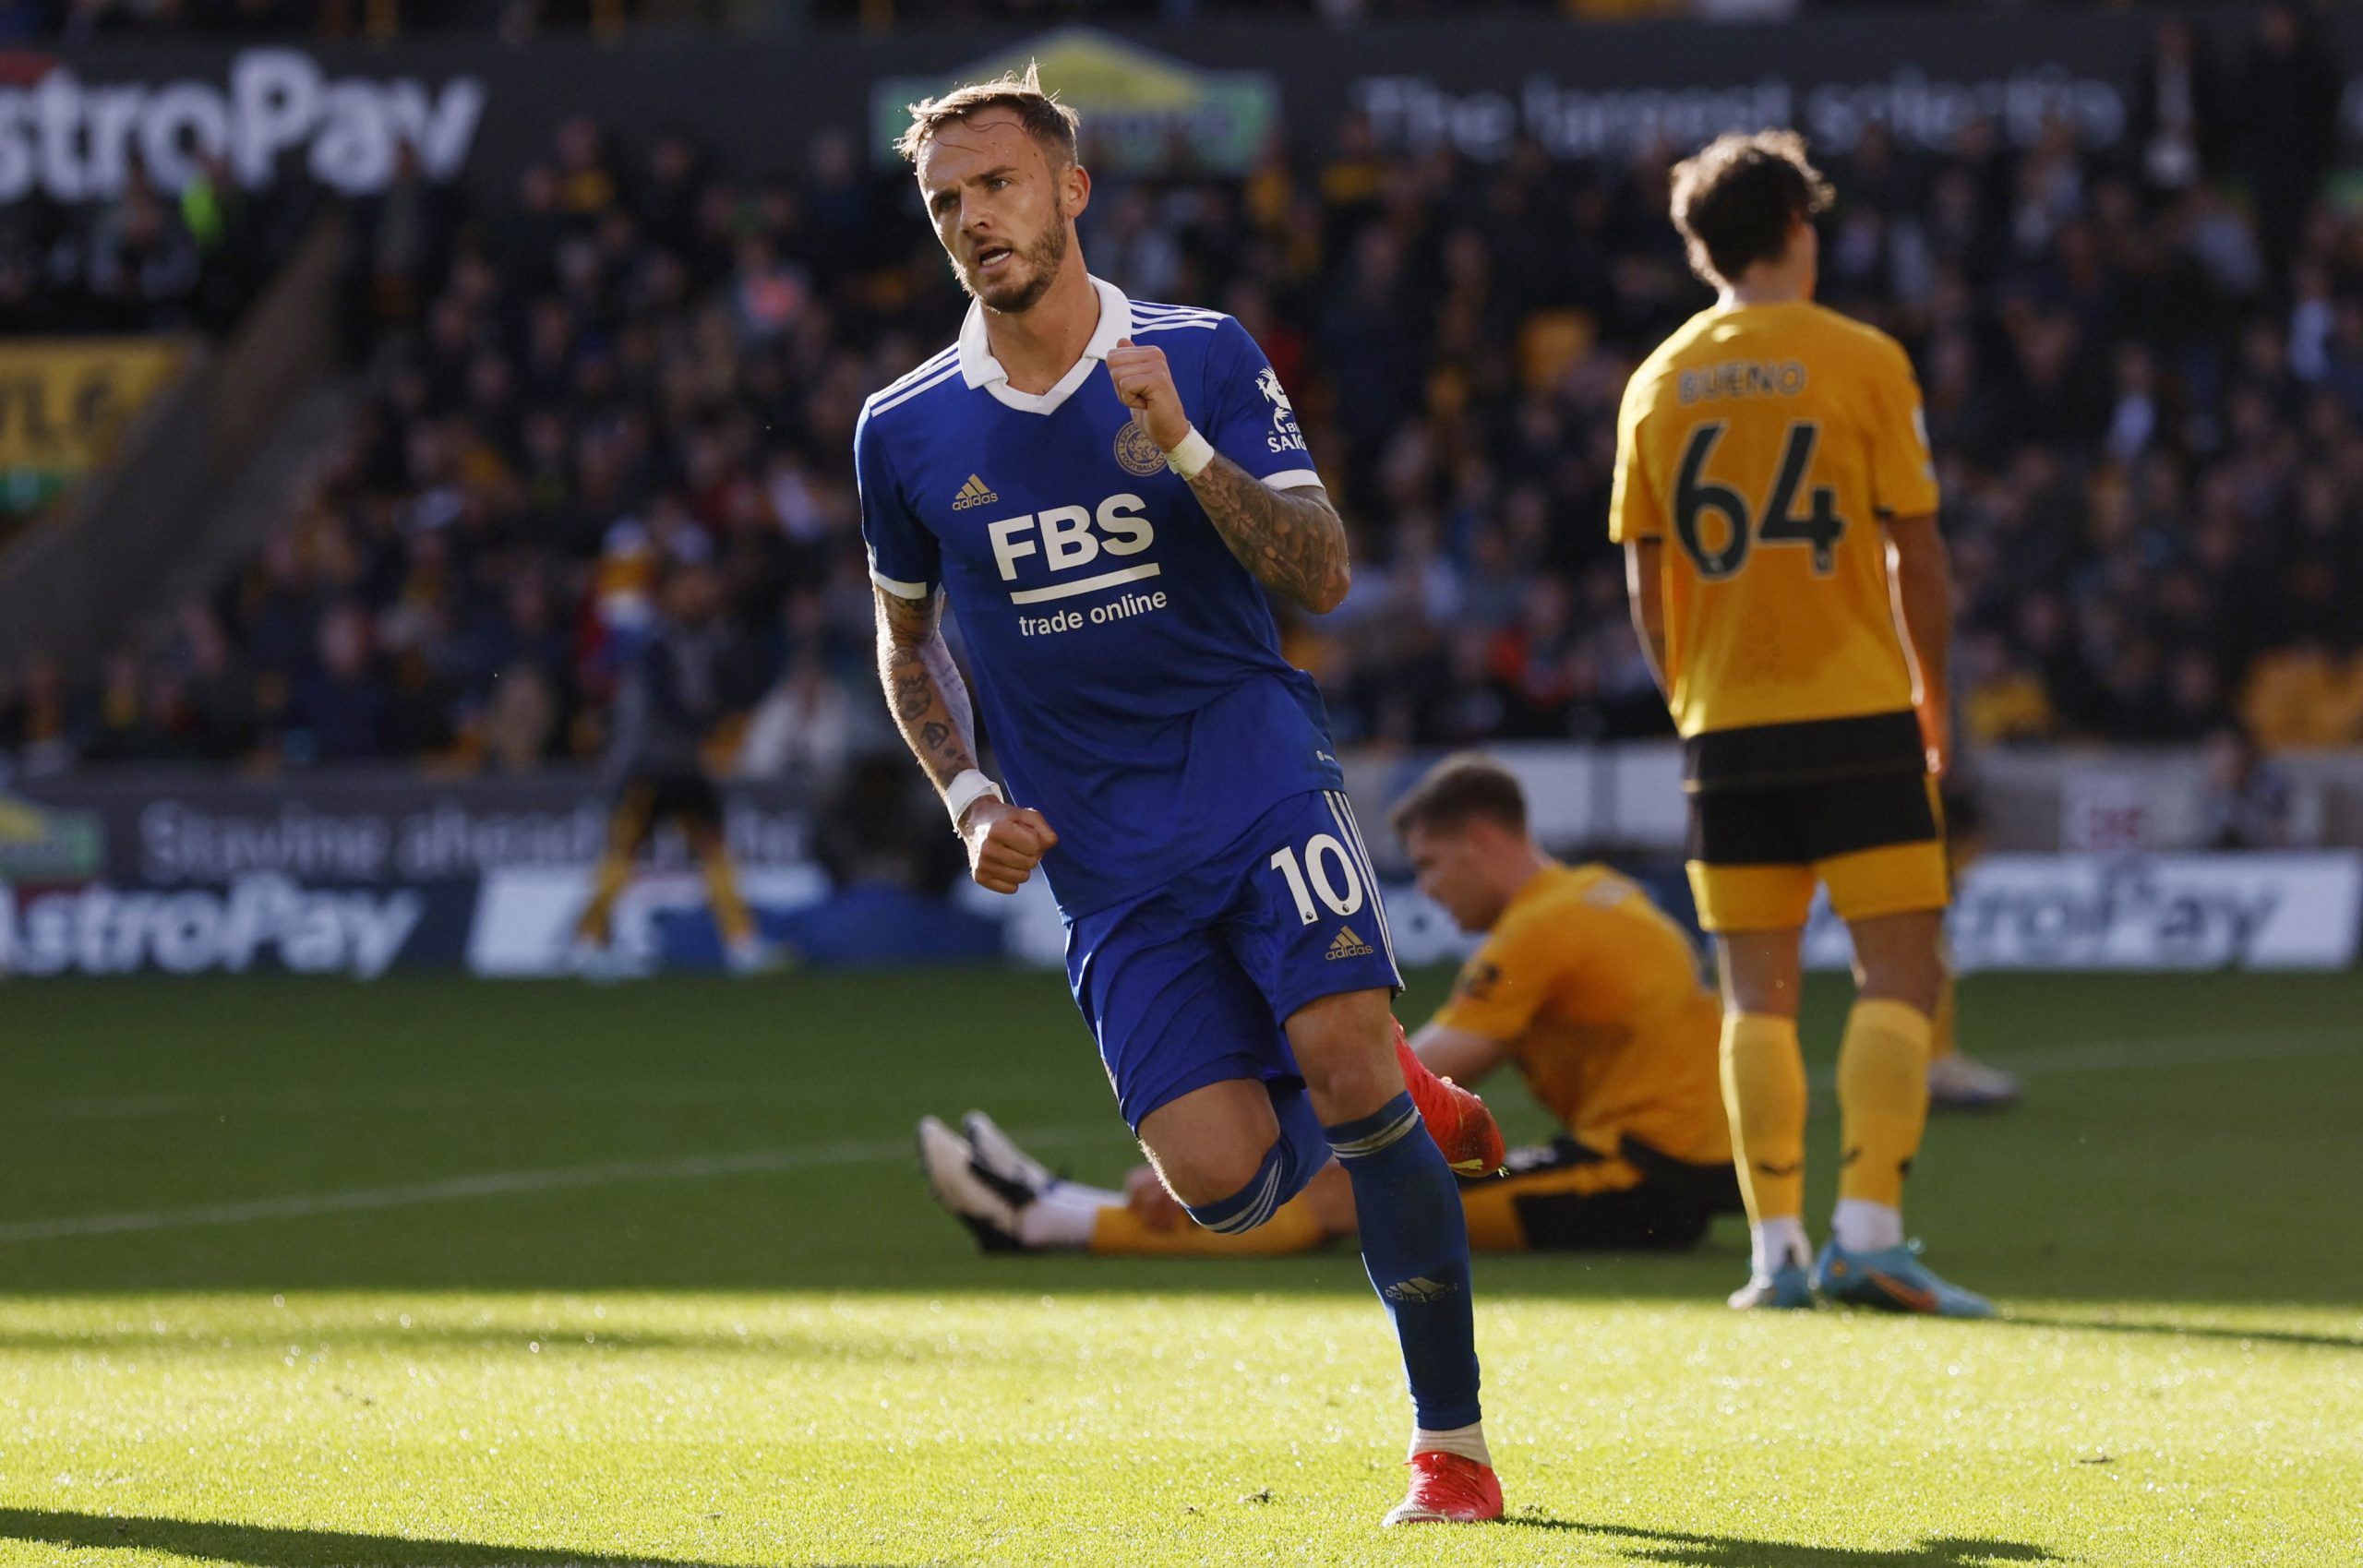 Leicester: Foxes ‘might be tempted’ to sell James Maddison -Follow up